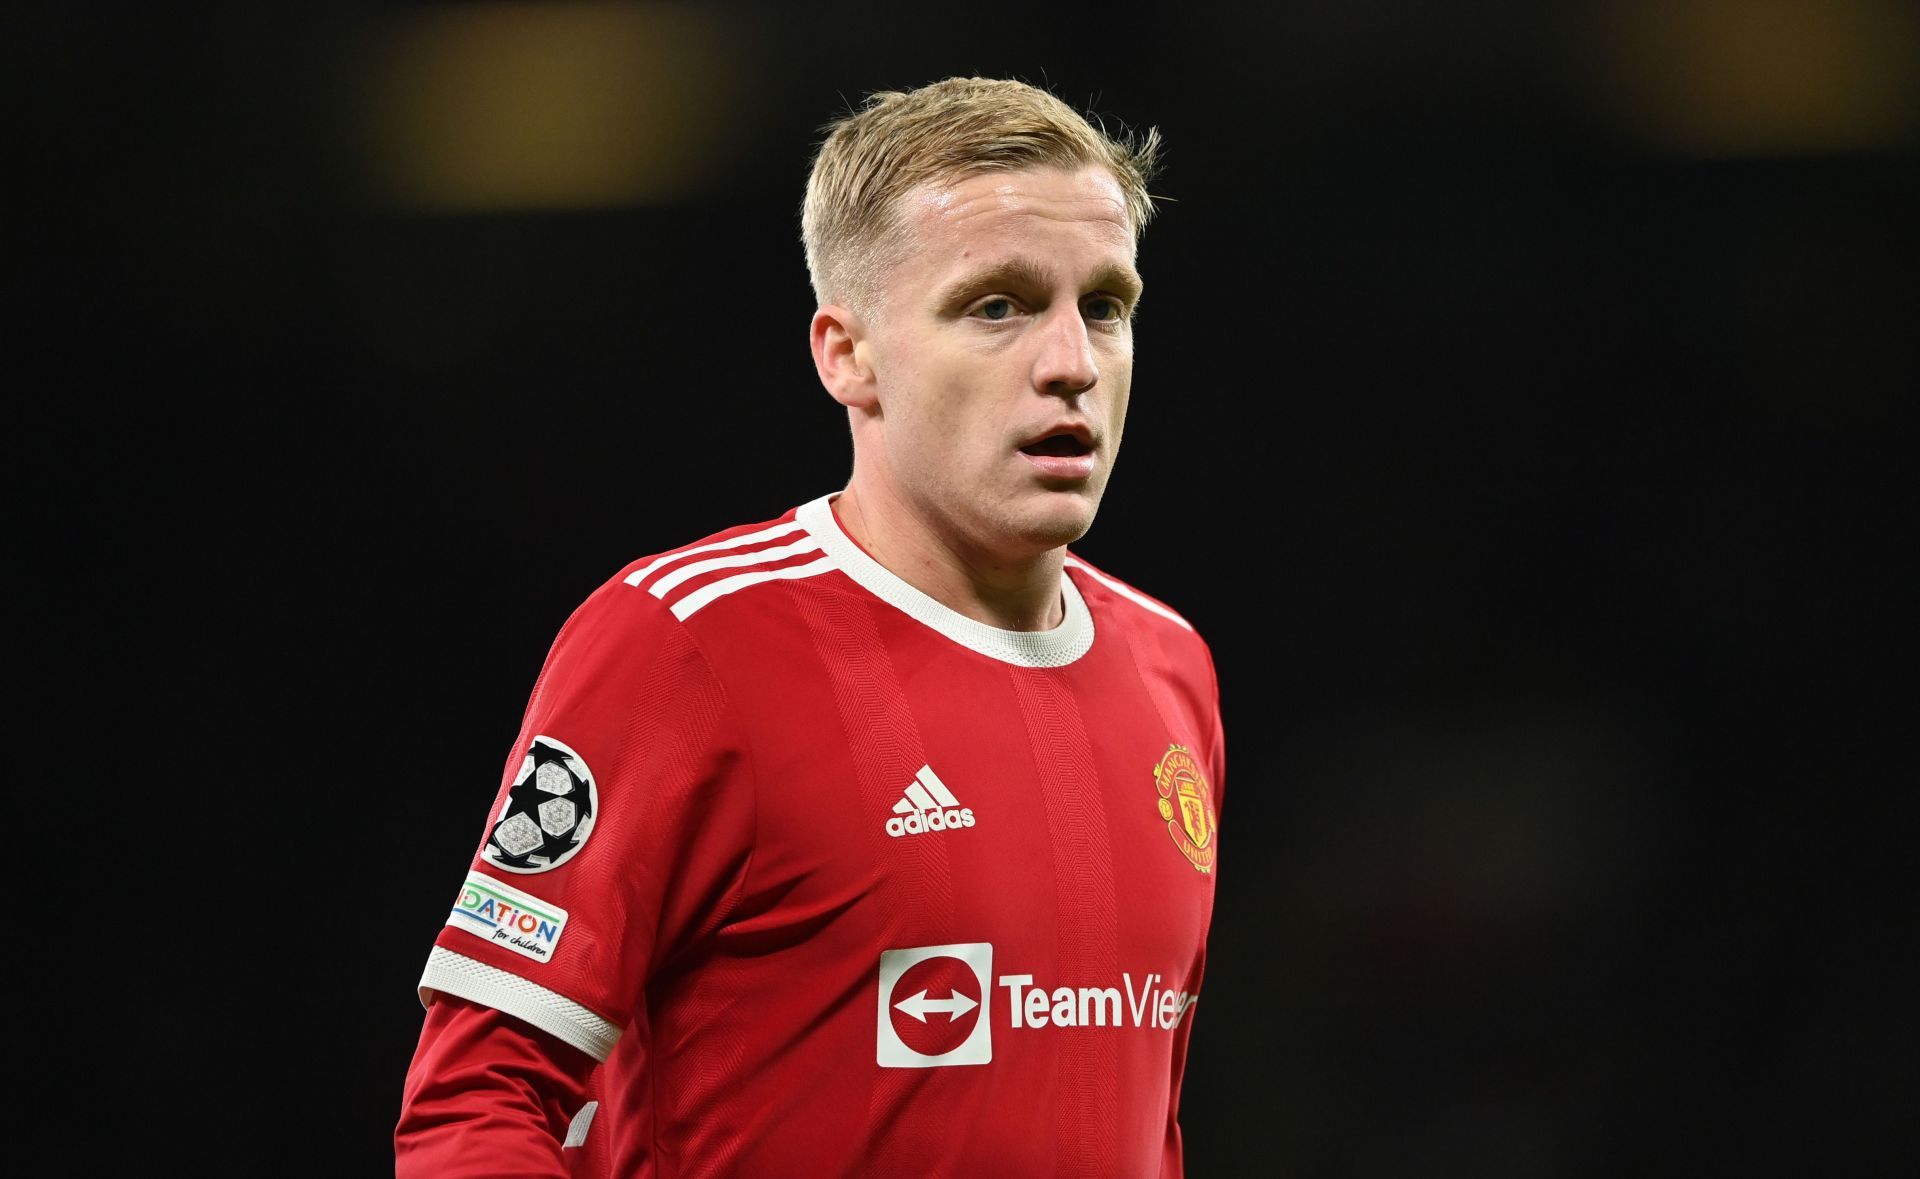 Donny van de Beek could leave Manchester United for Everton in the coming hours.